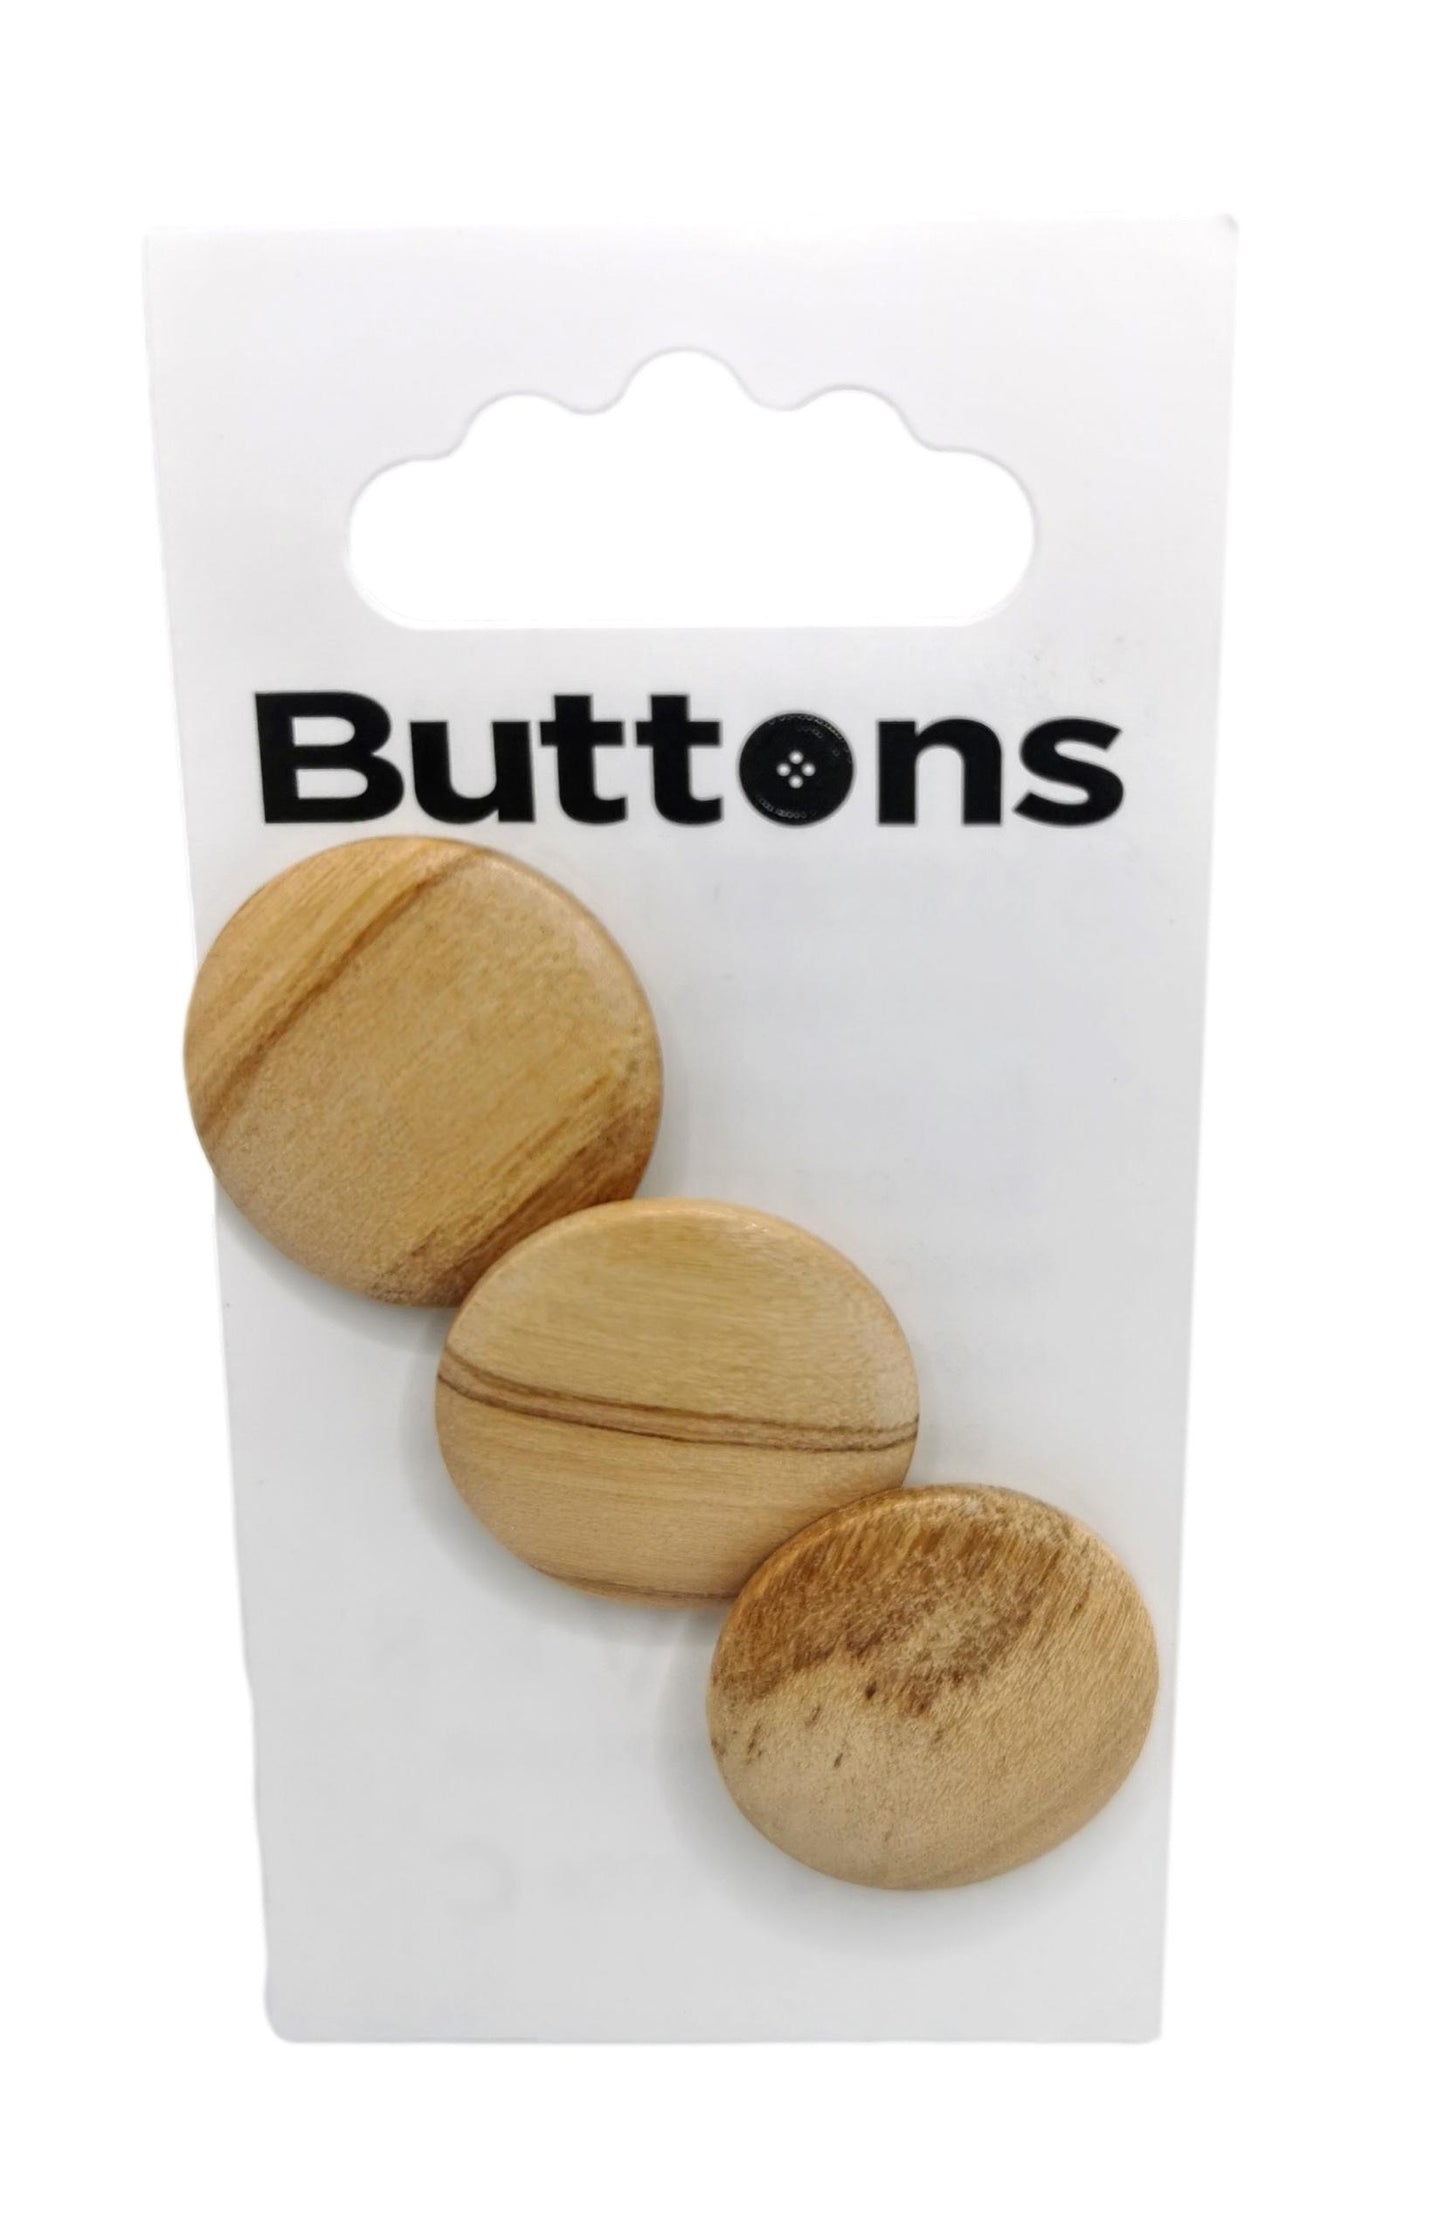 Milward - 3pack of Wooden Buttons - 22mm